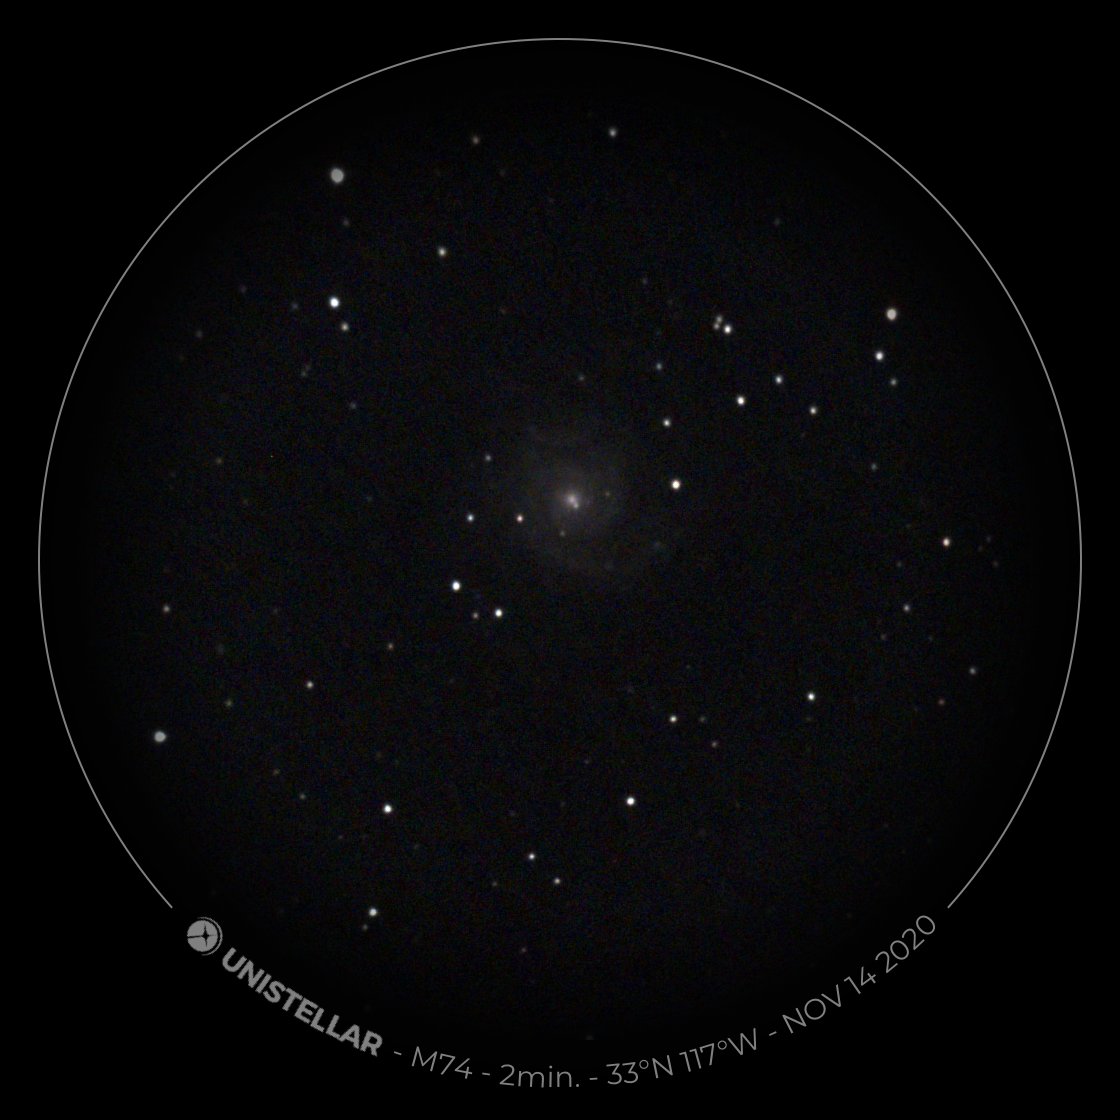 Here's are two short exposure images of spiral galaxies NGC 7331 and M74. You can see the spiral arms in M74 in just 2 minutes. Imagine using this at a star party (after the pandemic is over).